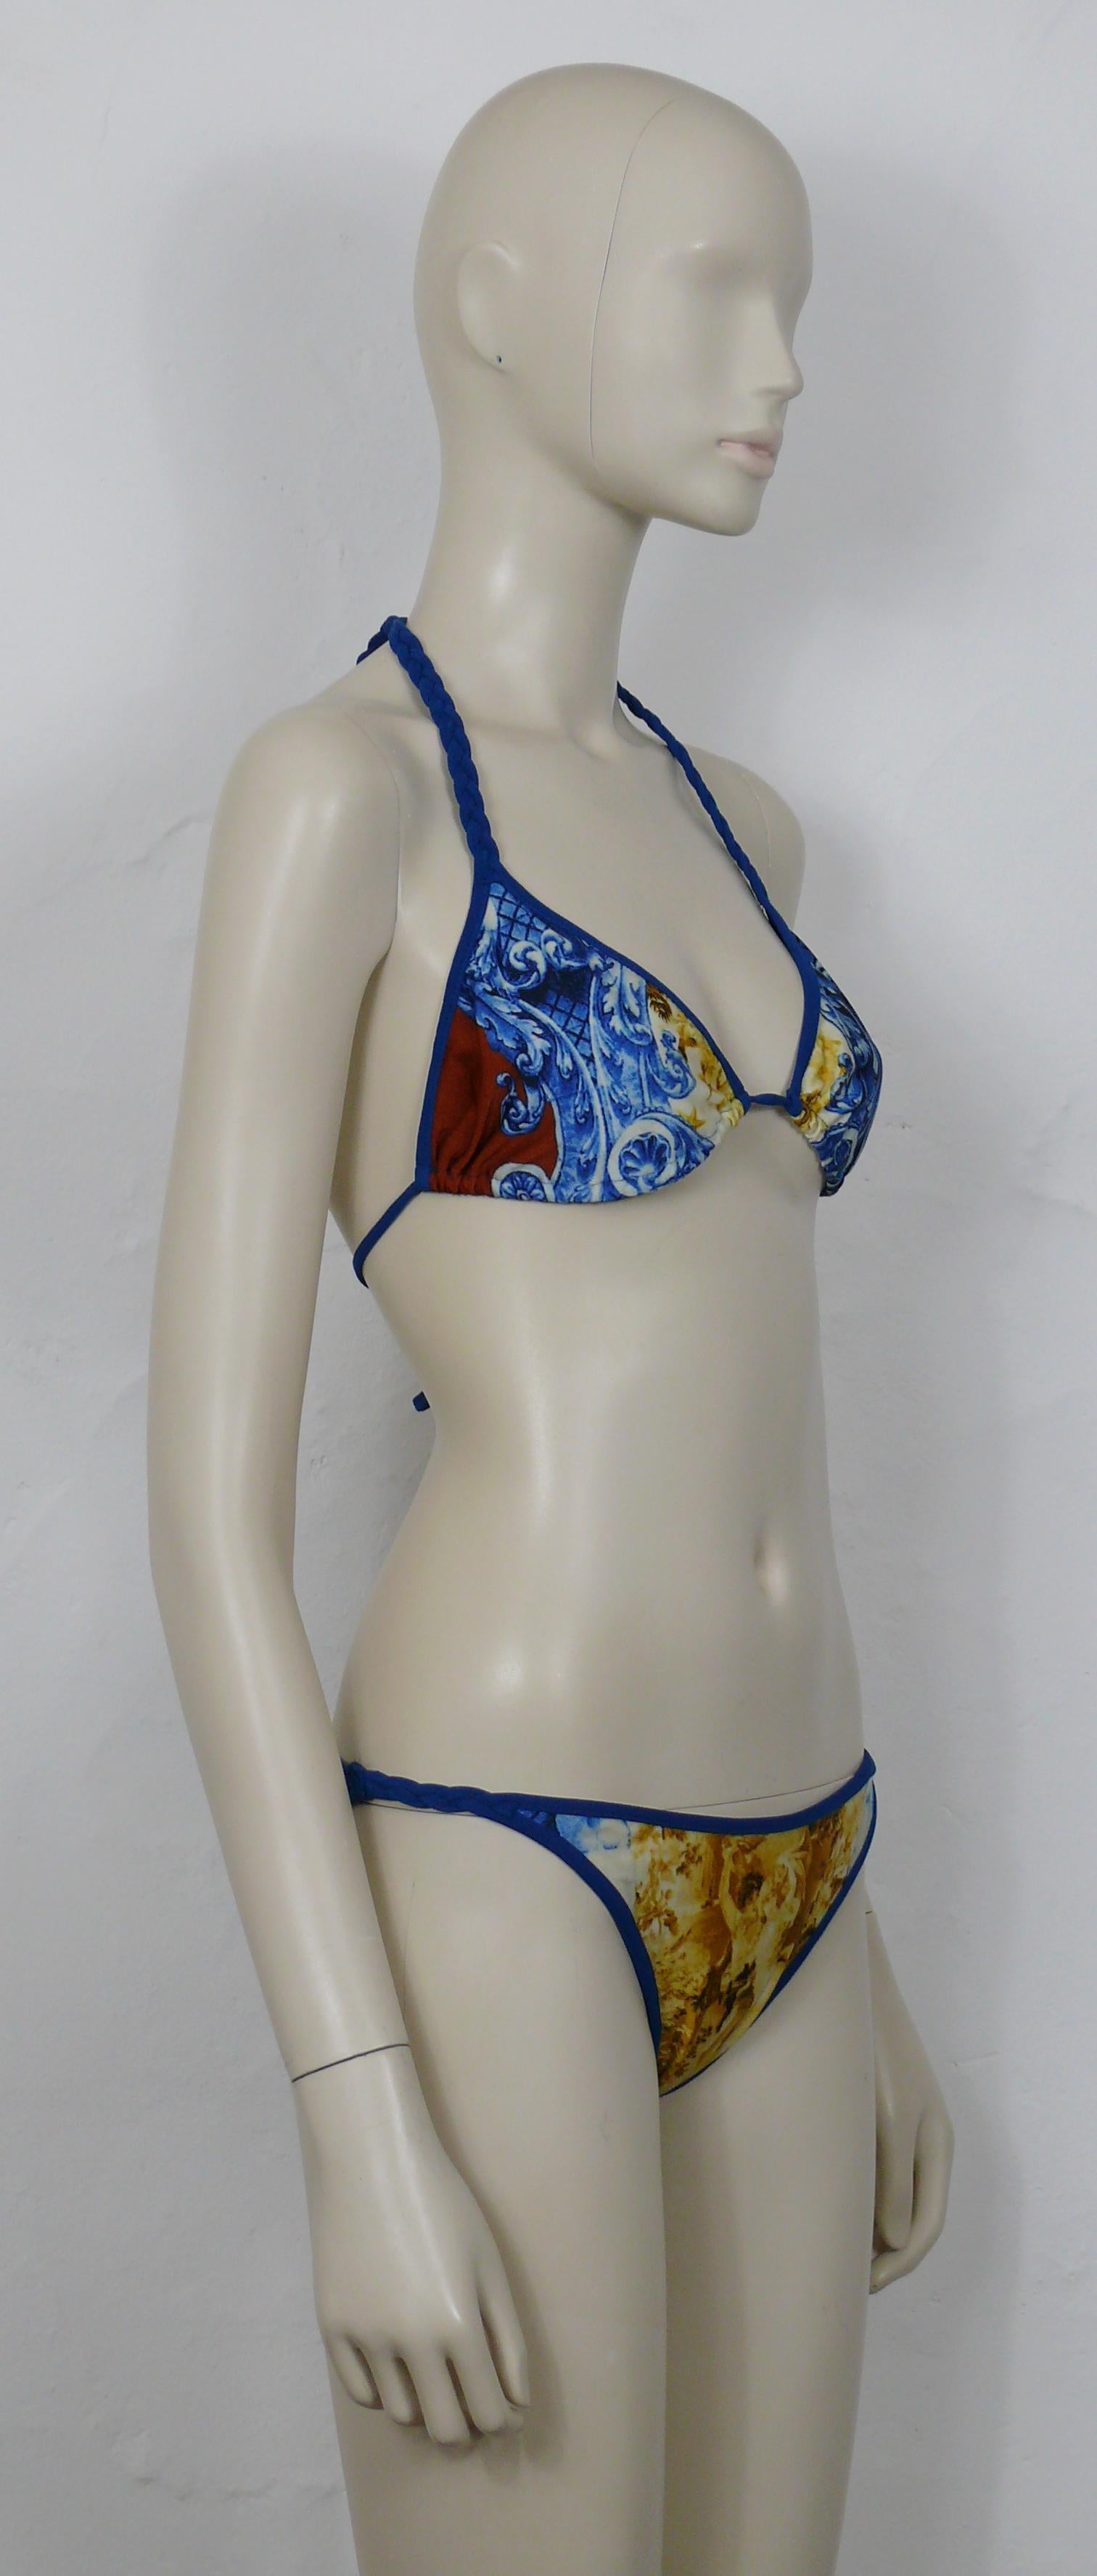 JEAN PAUL GAULTIER vintage two piece bikini swimsuit featuring a multicolored print with architectural elements, a couple of lovers, puttis and GAULTIER logo.

Blue braided ropes detail.

Label reads JEAN PAUL GAULTIER SOLEIL.
Made in Italy.

Size